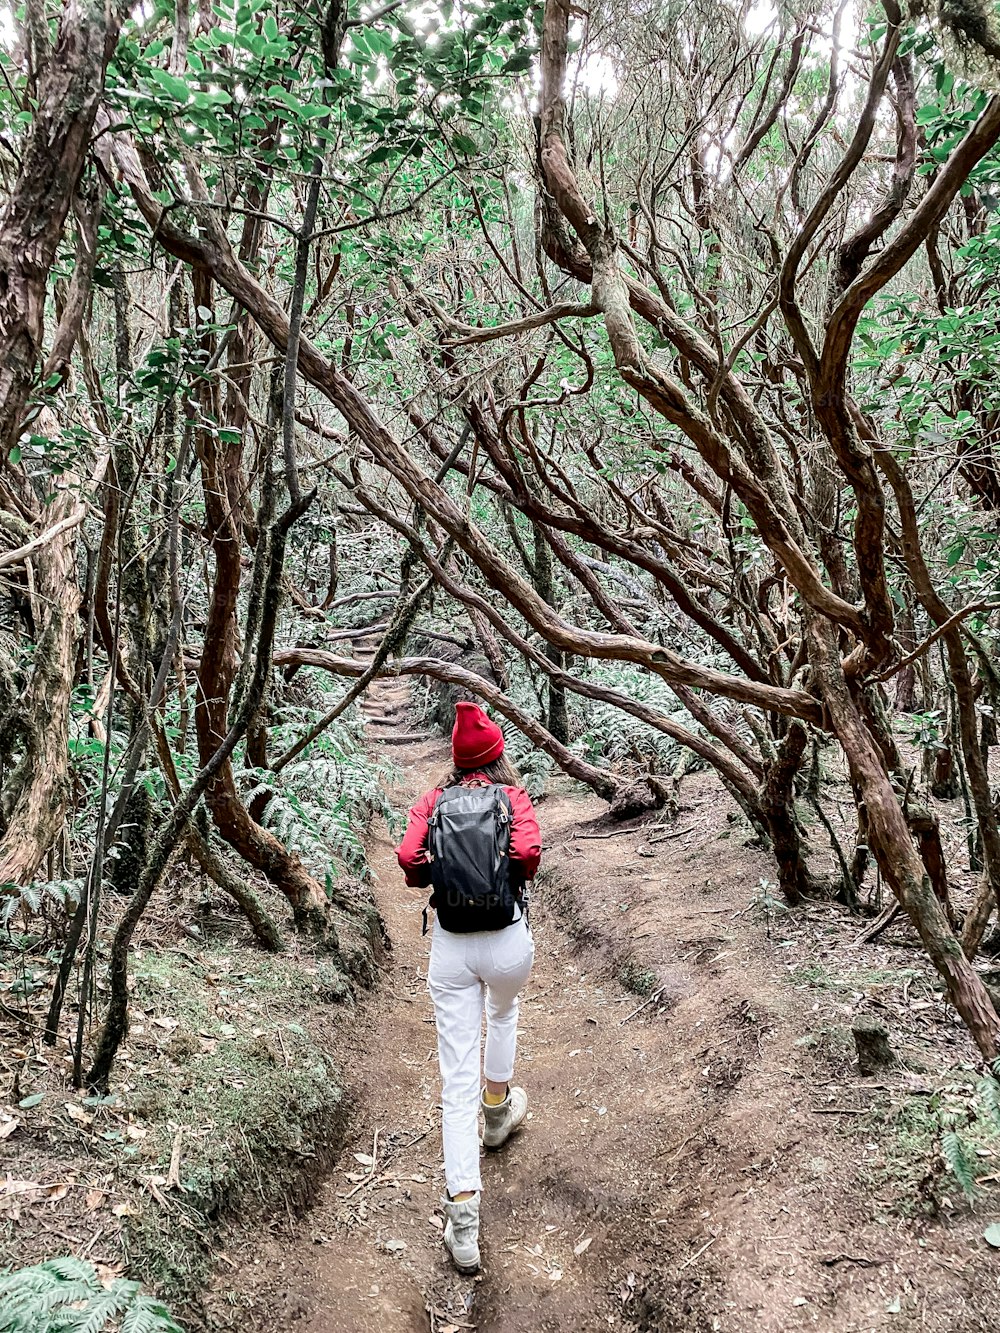 Woman hiking with backpack in the beautiful rainforest, traveling on Tenerife island, Spain. Image made on mobile phone